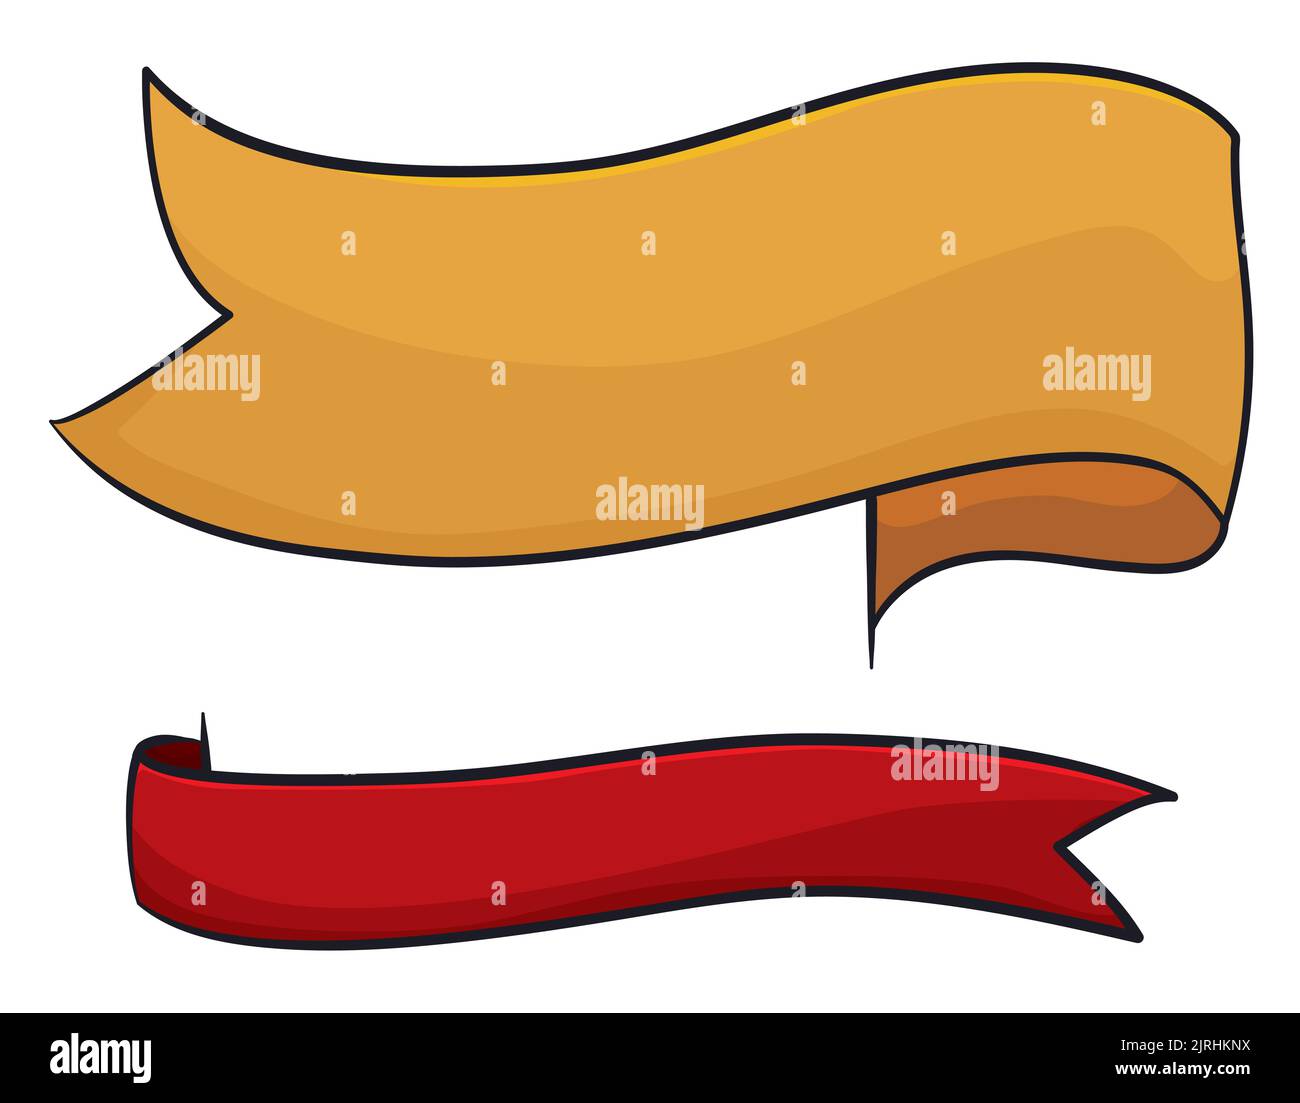 Ribbons like template, in cartoon style and with waving effect, one red and other and bigger in yellow color. Stock Vector